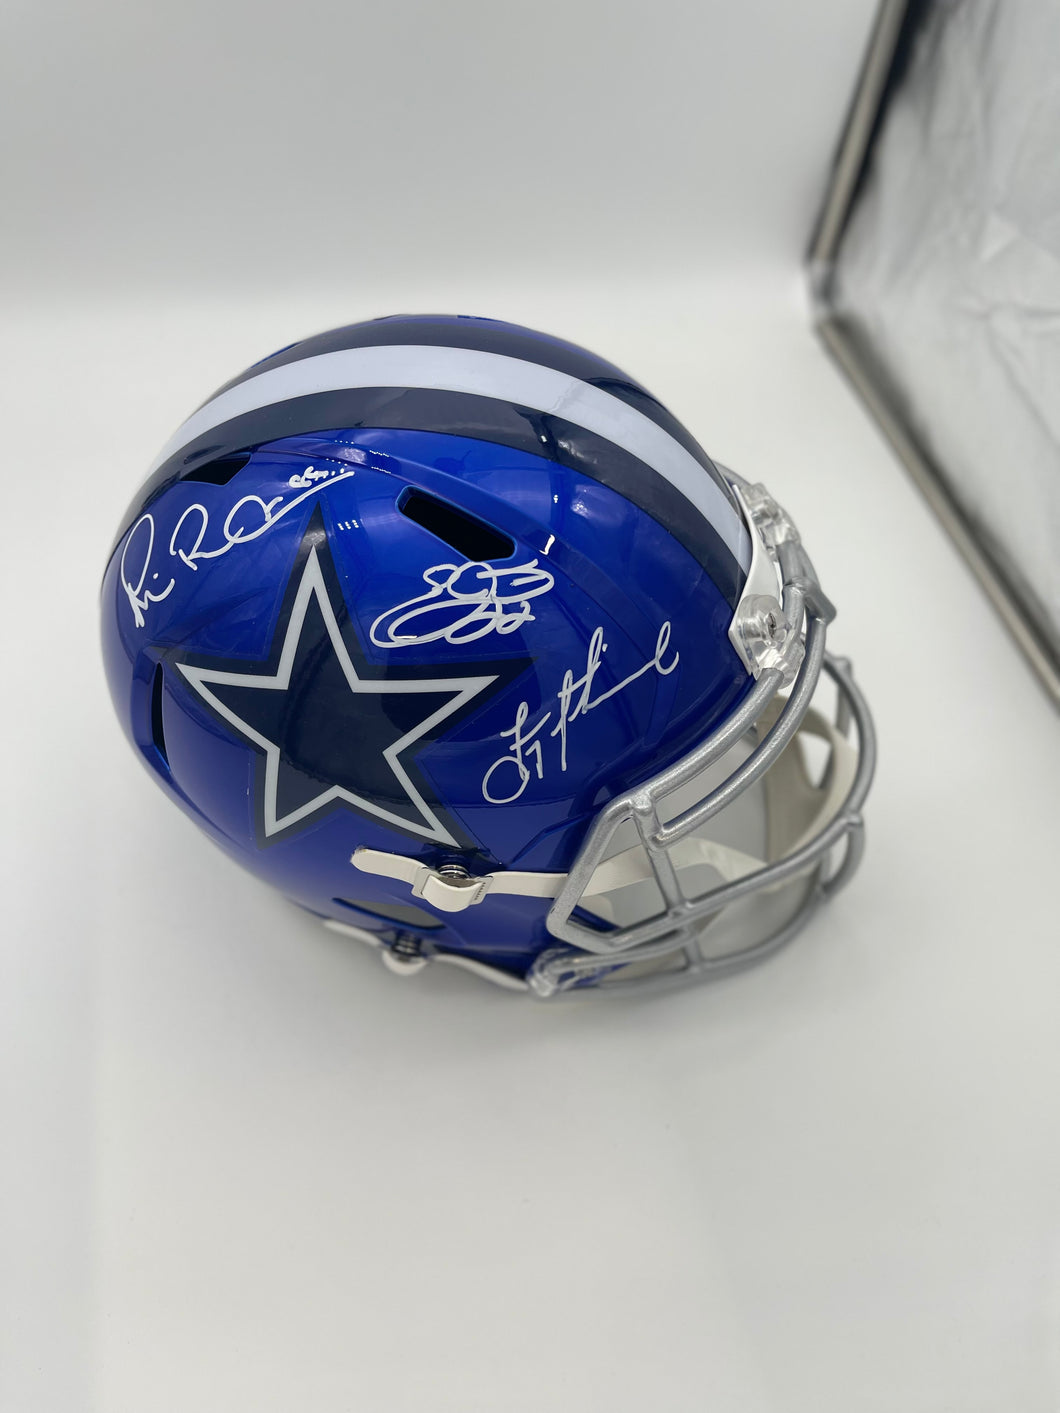 Troy Aikman, Emmitt Smith and Michael Irvin signed full size helmet